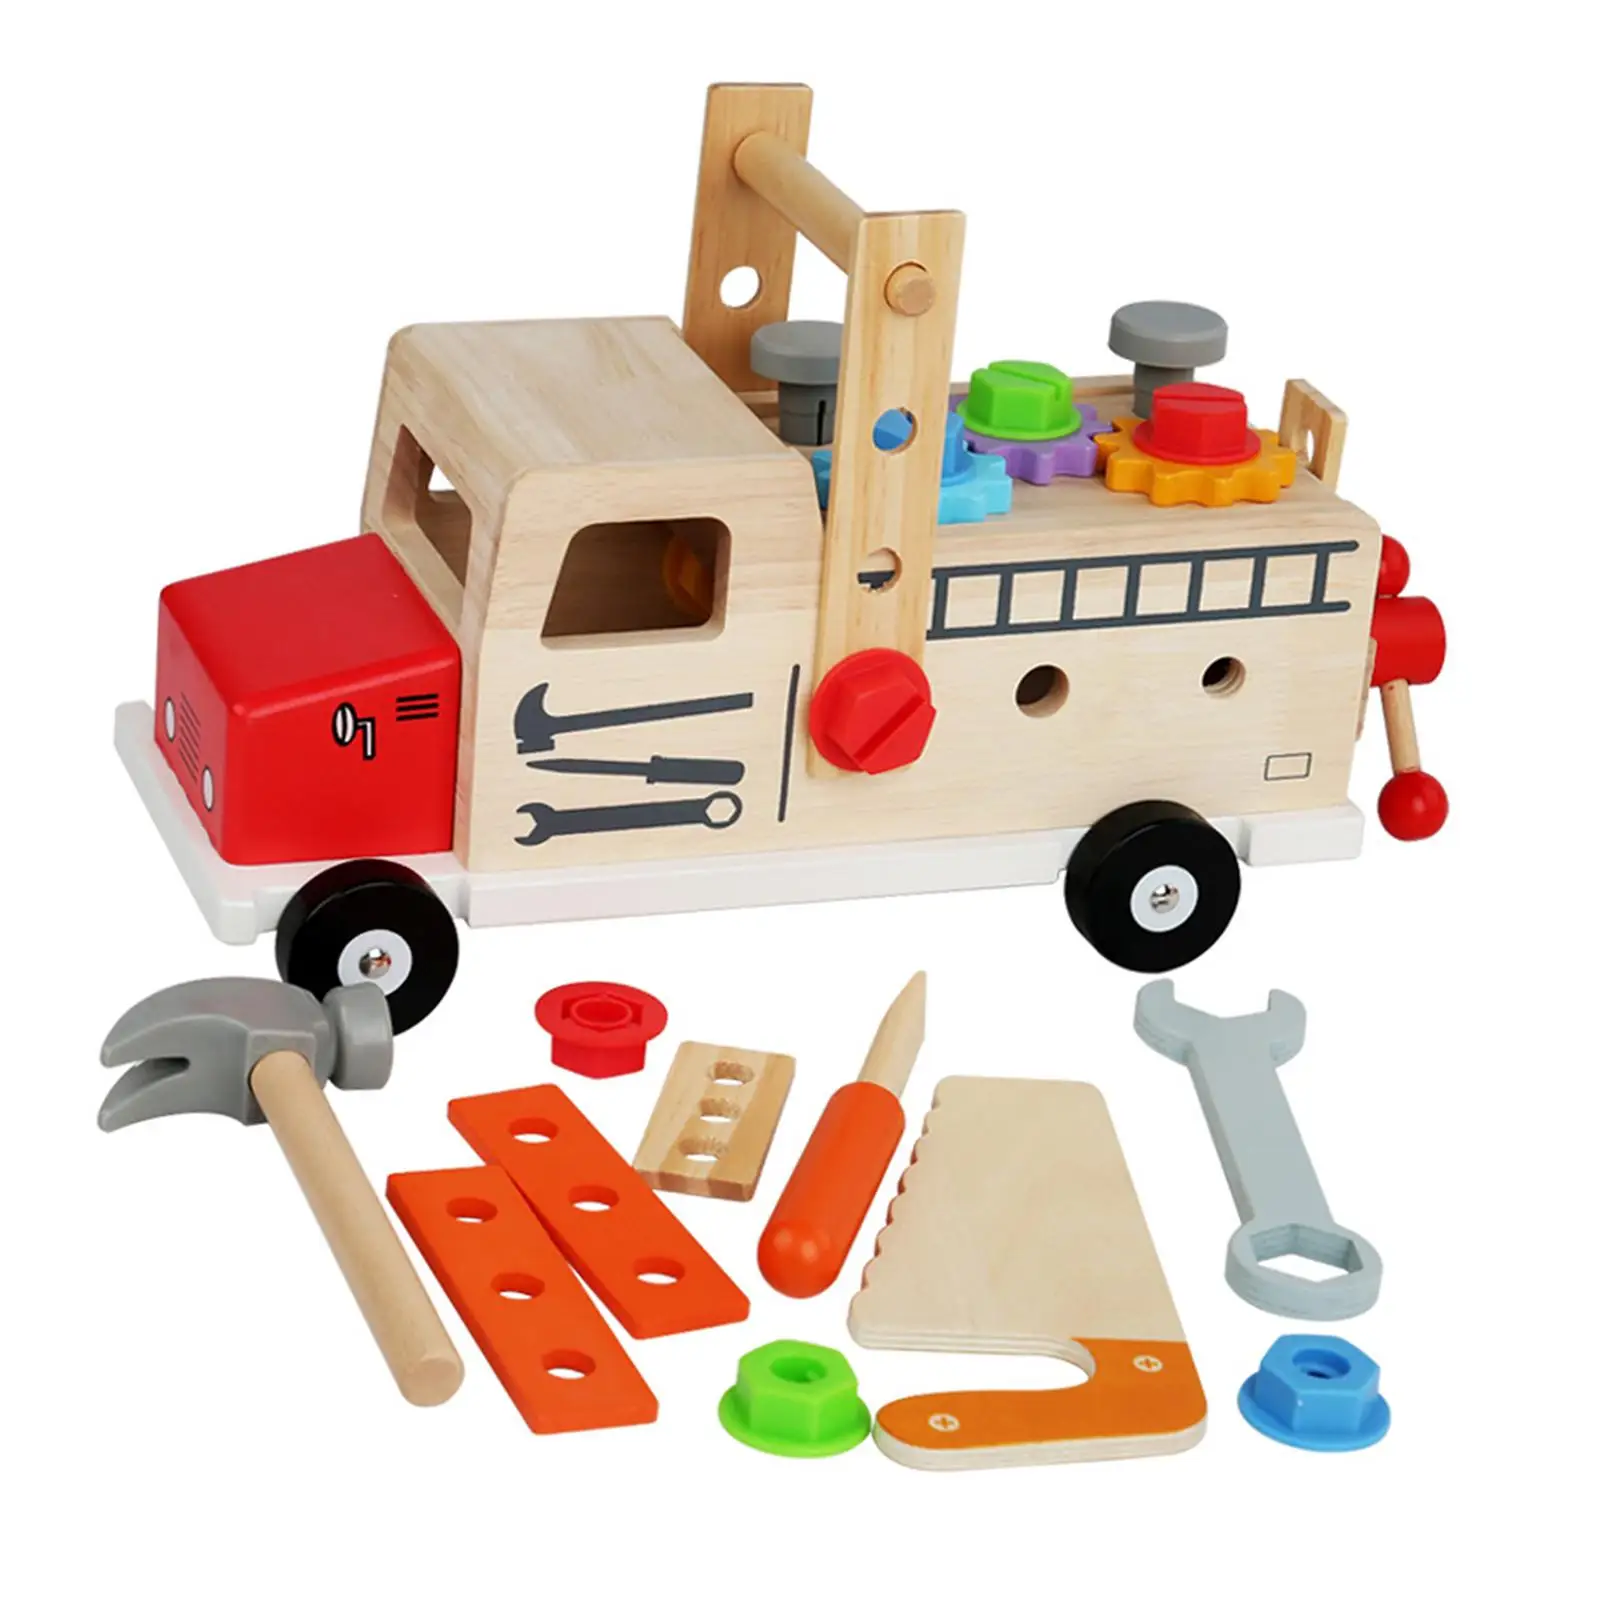 Construction Toy Wood Kids Tool Set Birthday Gift Creative Toy Tool Set for Toddlers for 3 4 5 6 Years Old Xmas Present